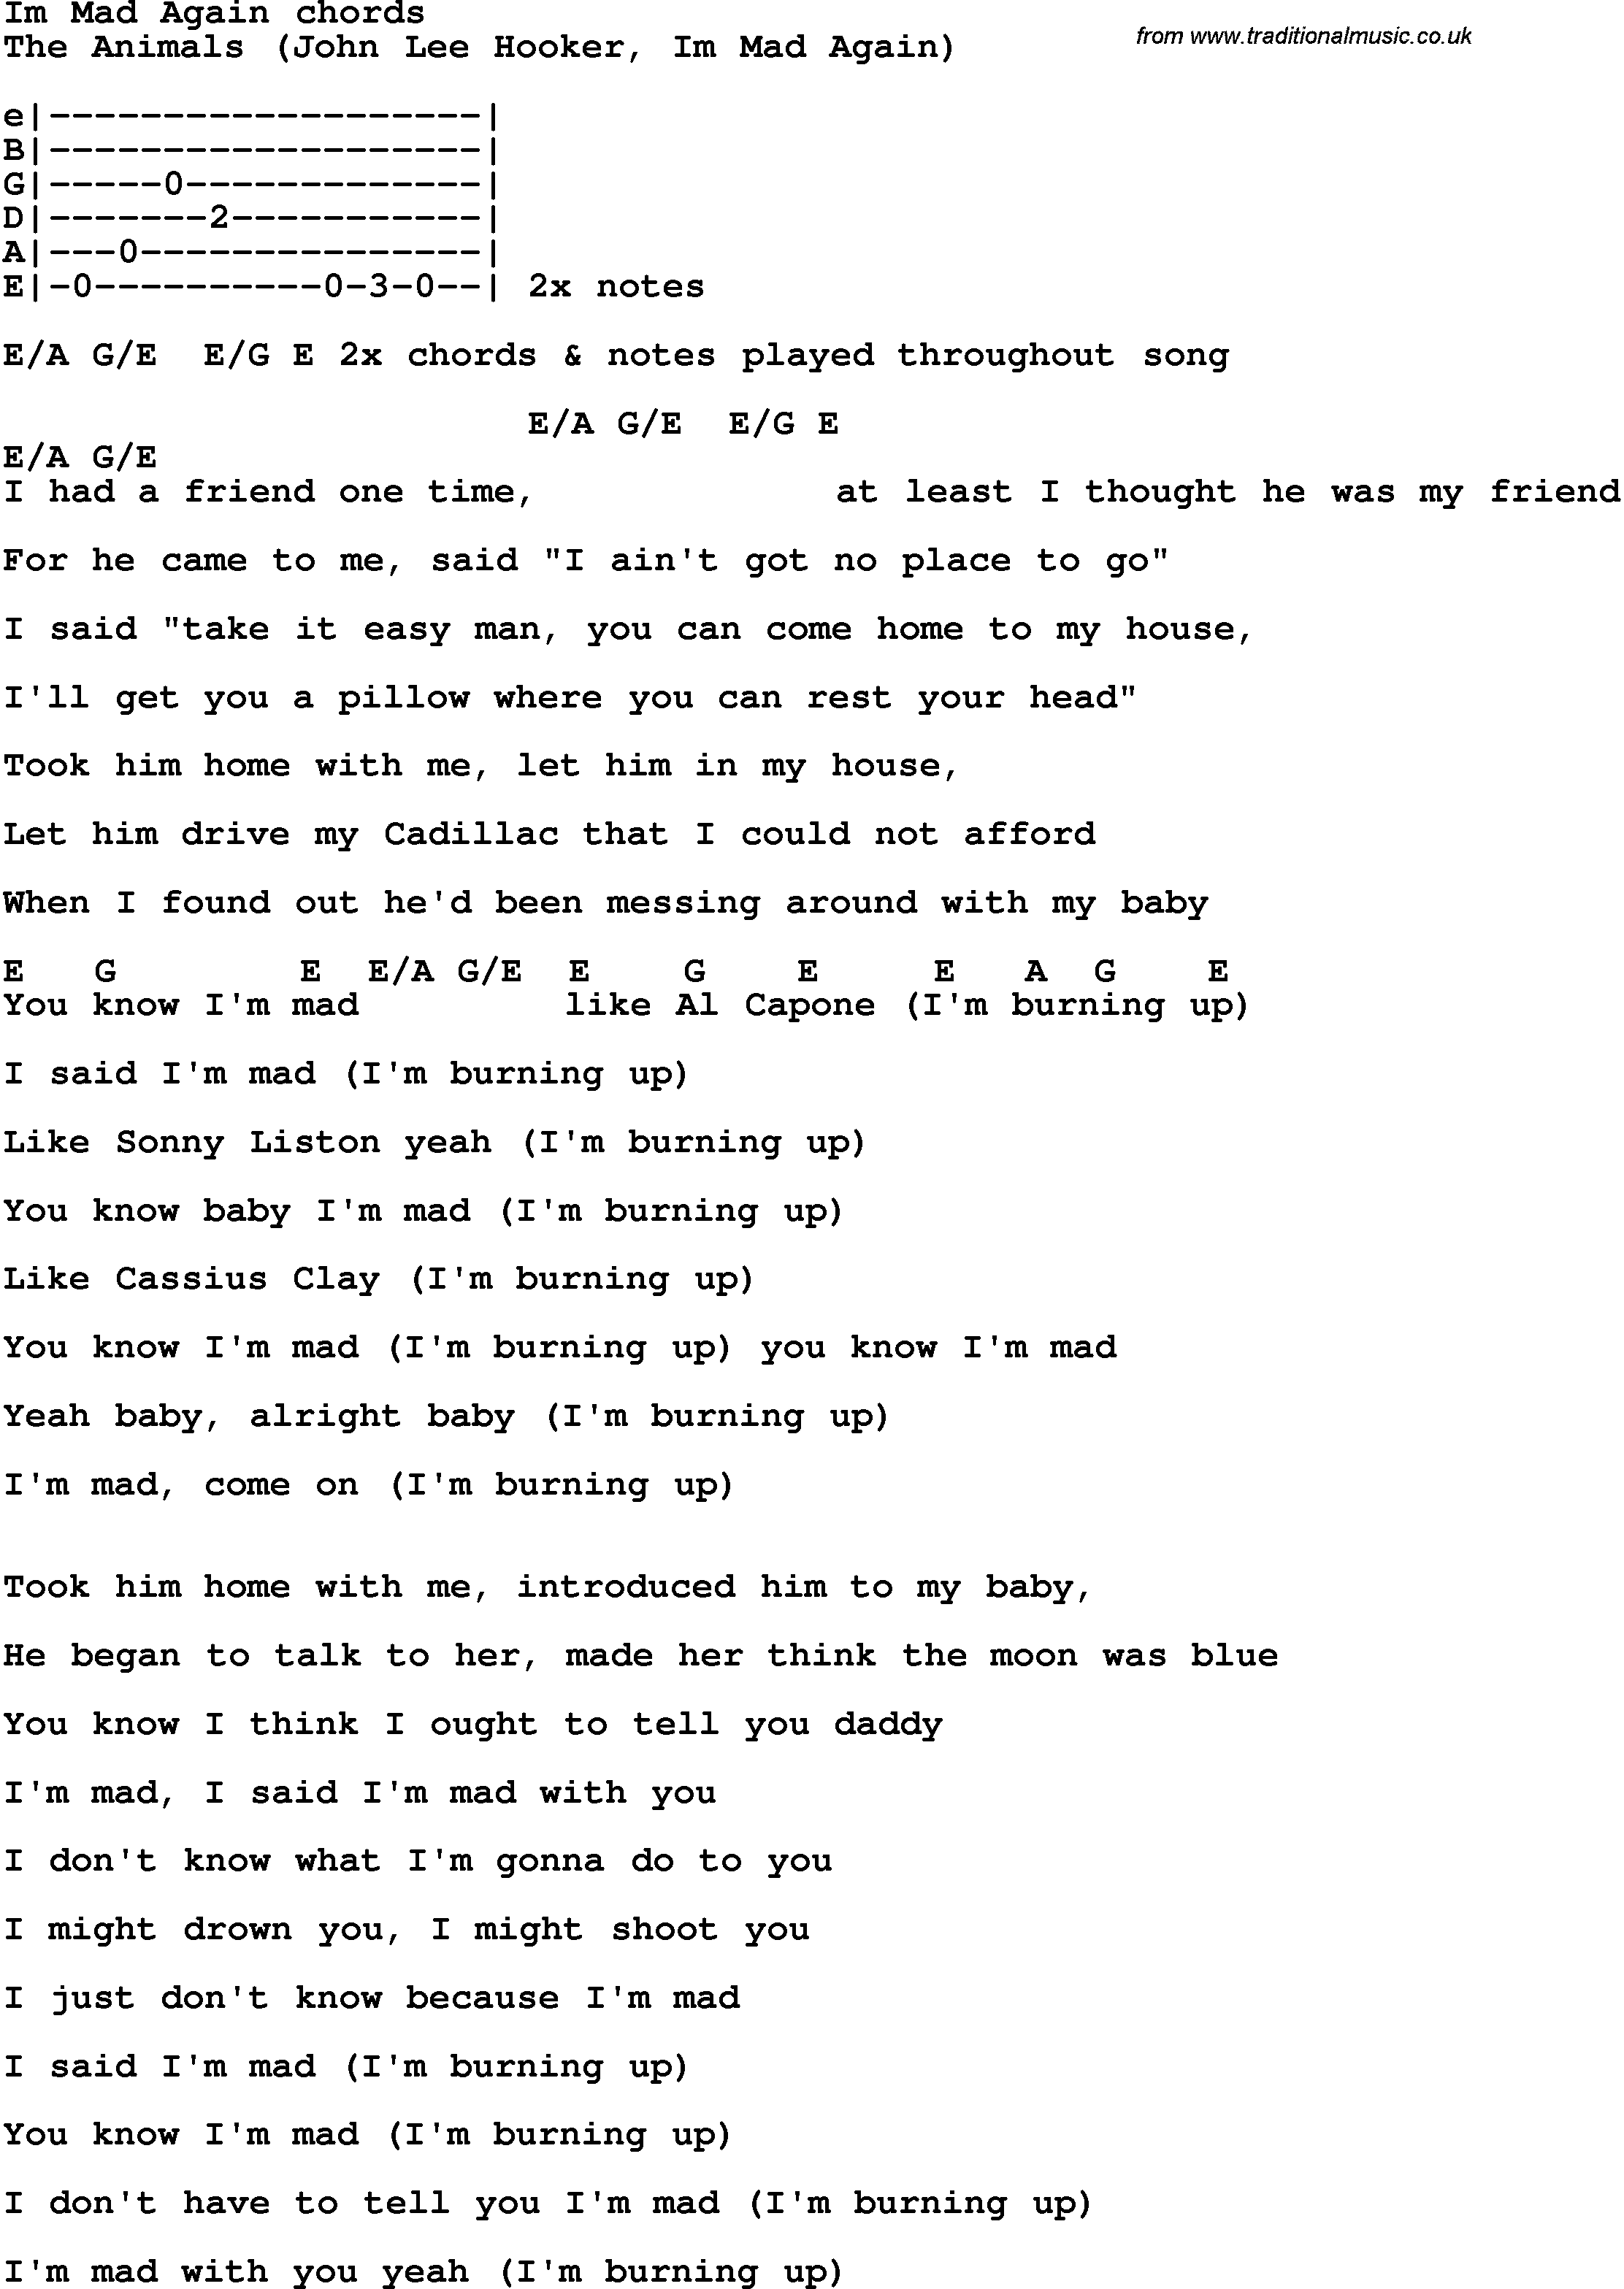 Song Lyrics with guitar chords for Im Mad Again